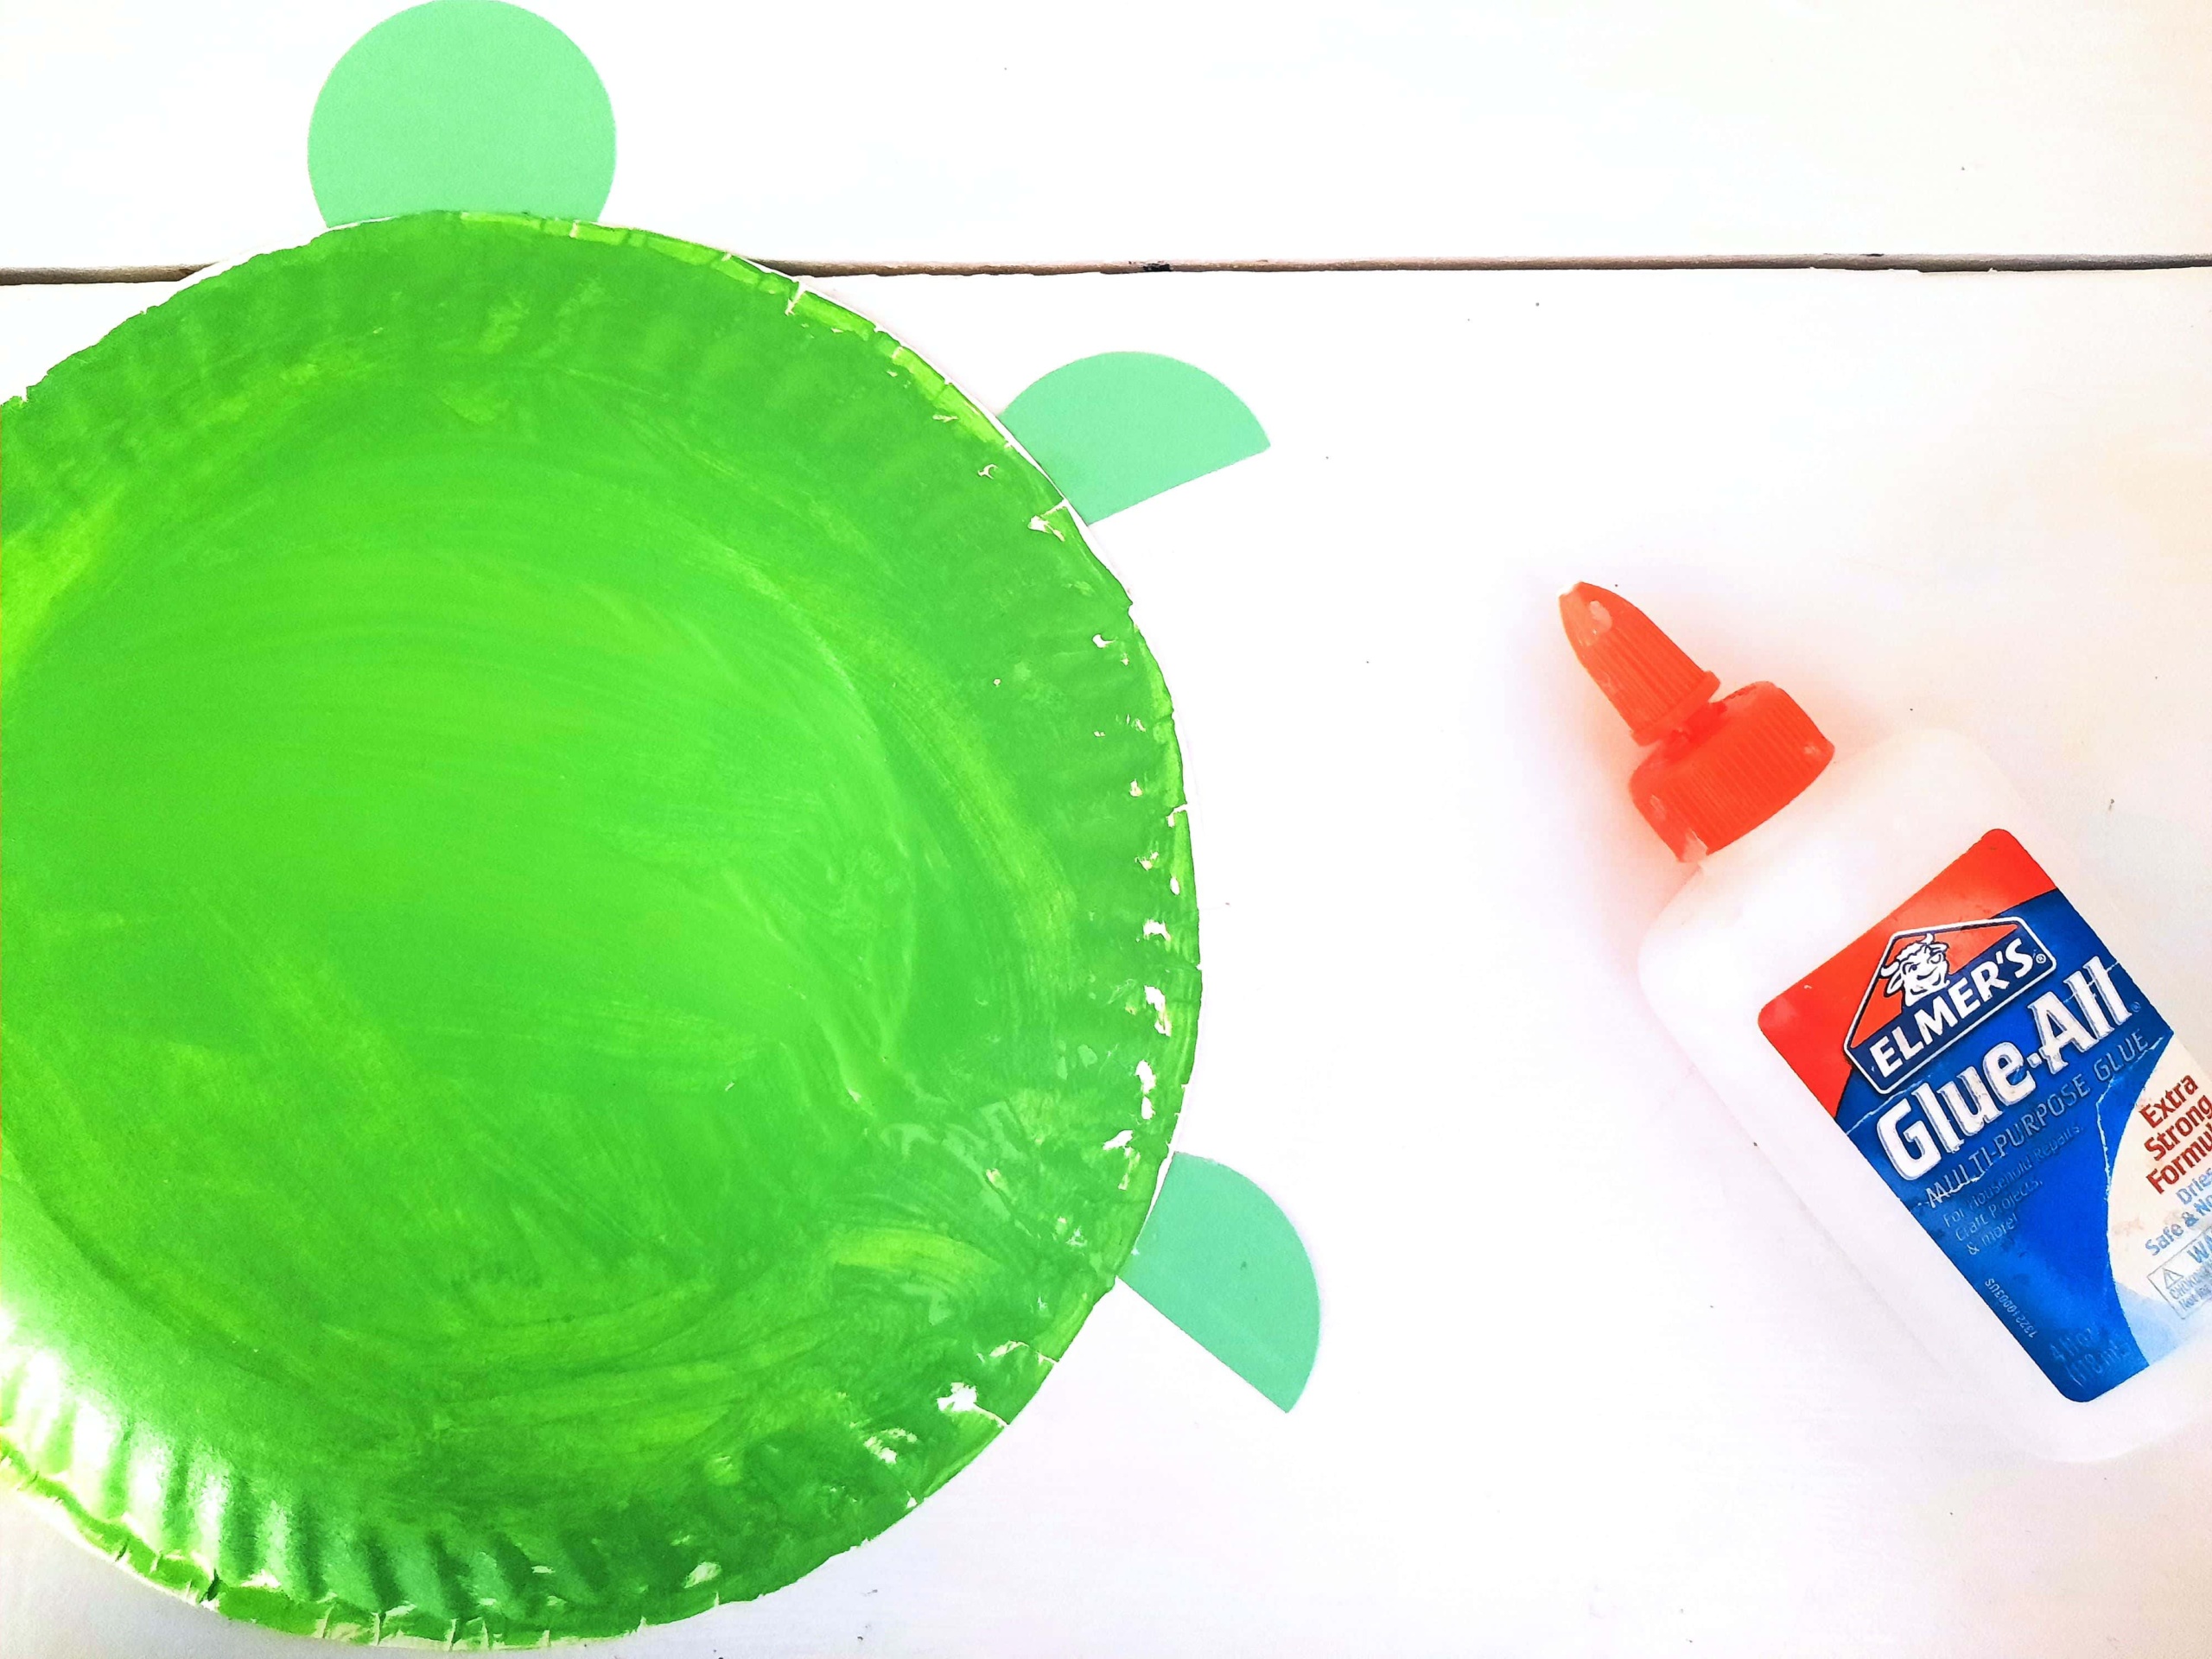 Grab 3 Green Circles, one for the Head and cut the other two in half for the feet, glue them to the paper plate